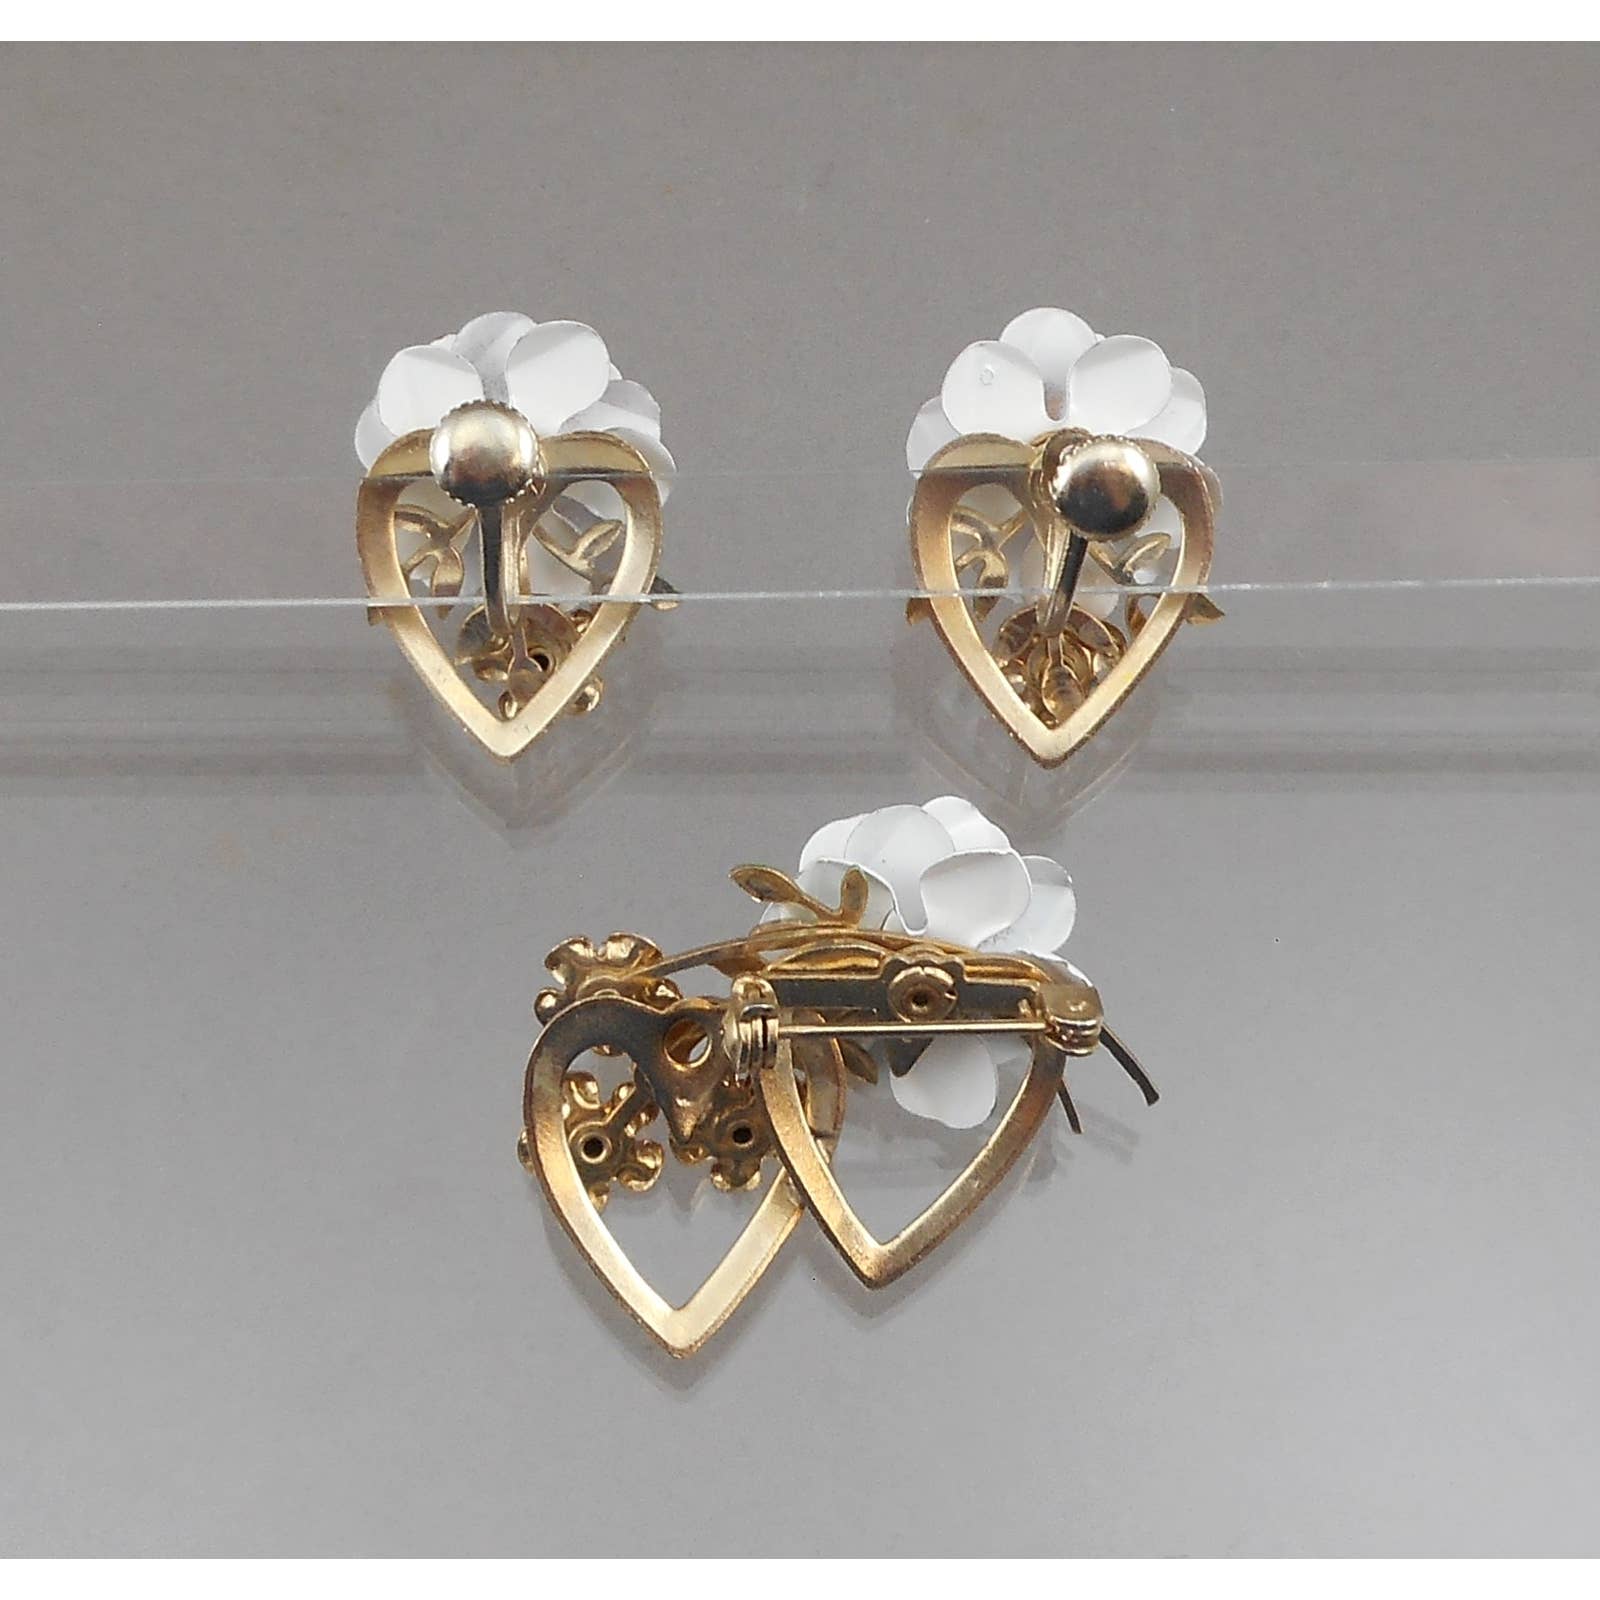 Vintage 1950s Jewelry Set - Flower and Heart Design Screw Back